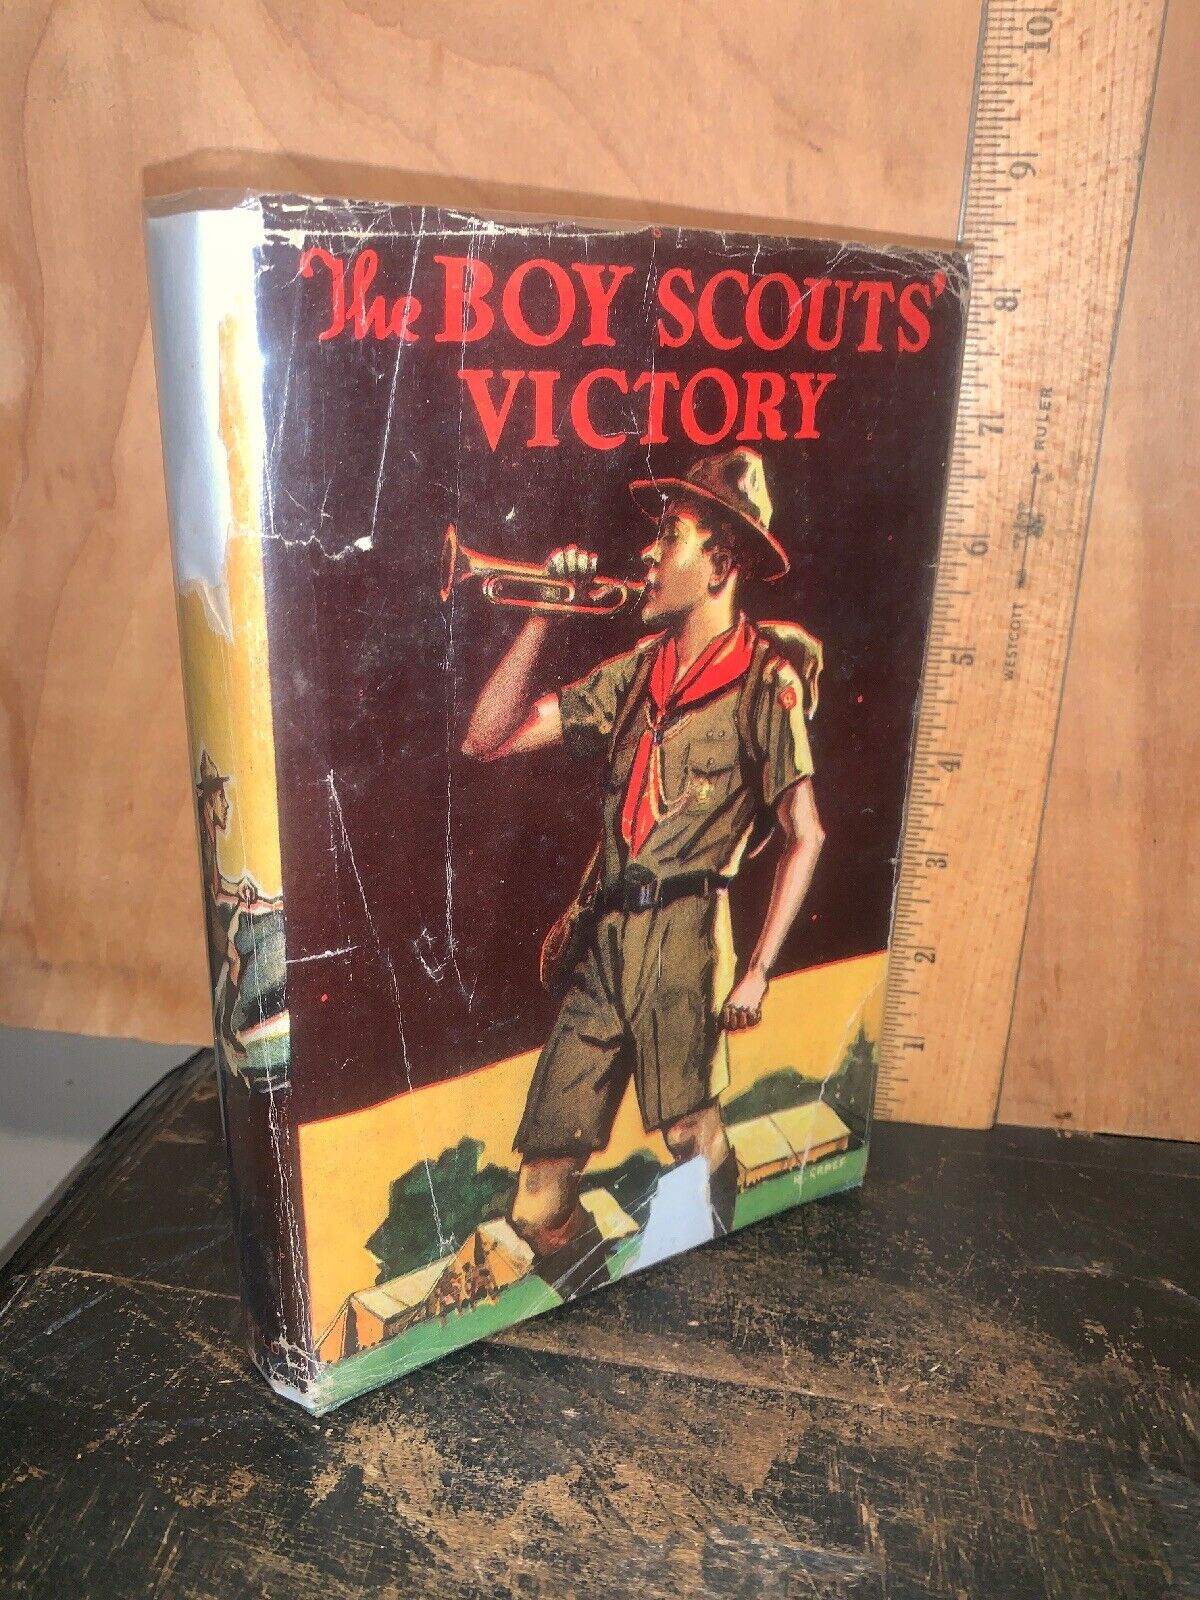 Vintage Boy Scout Victory Book By George Durston.